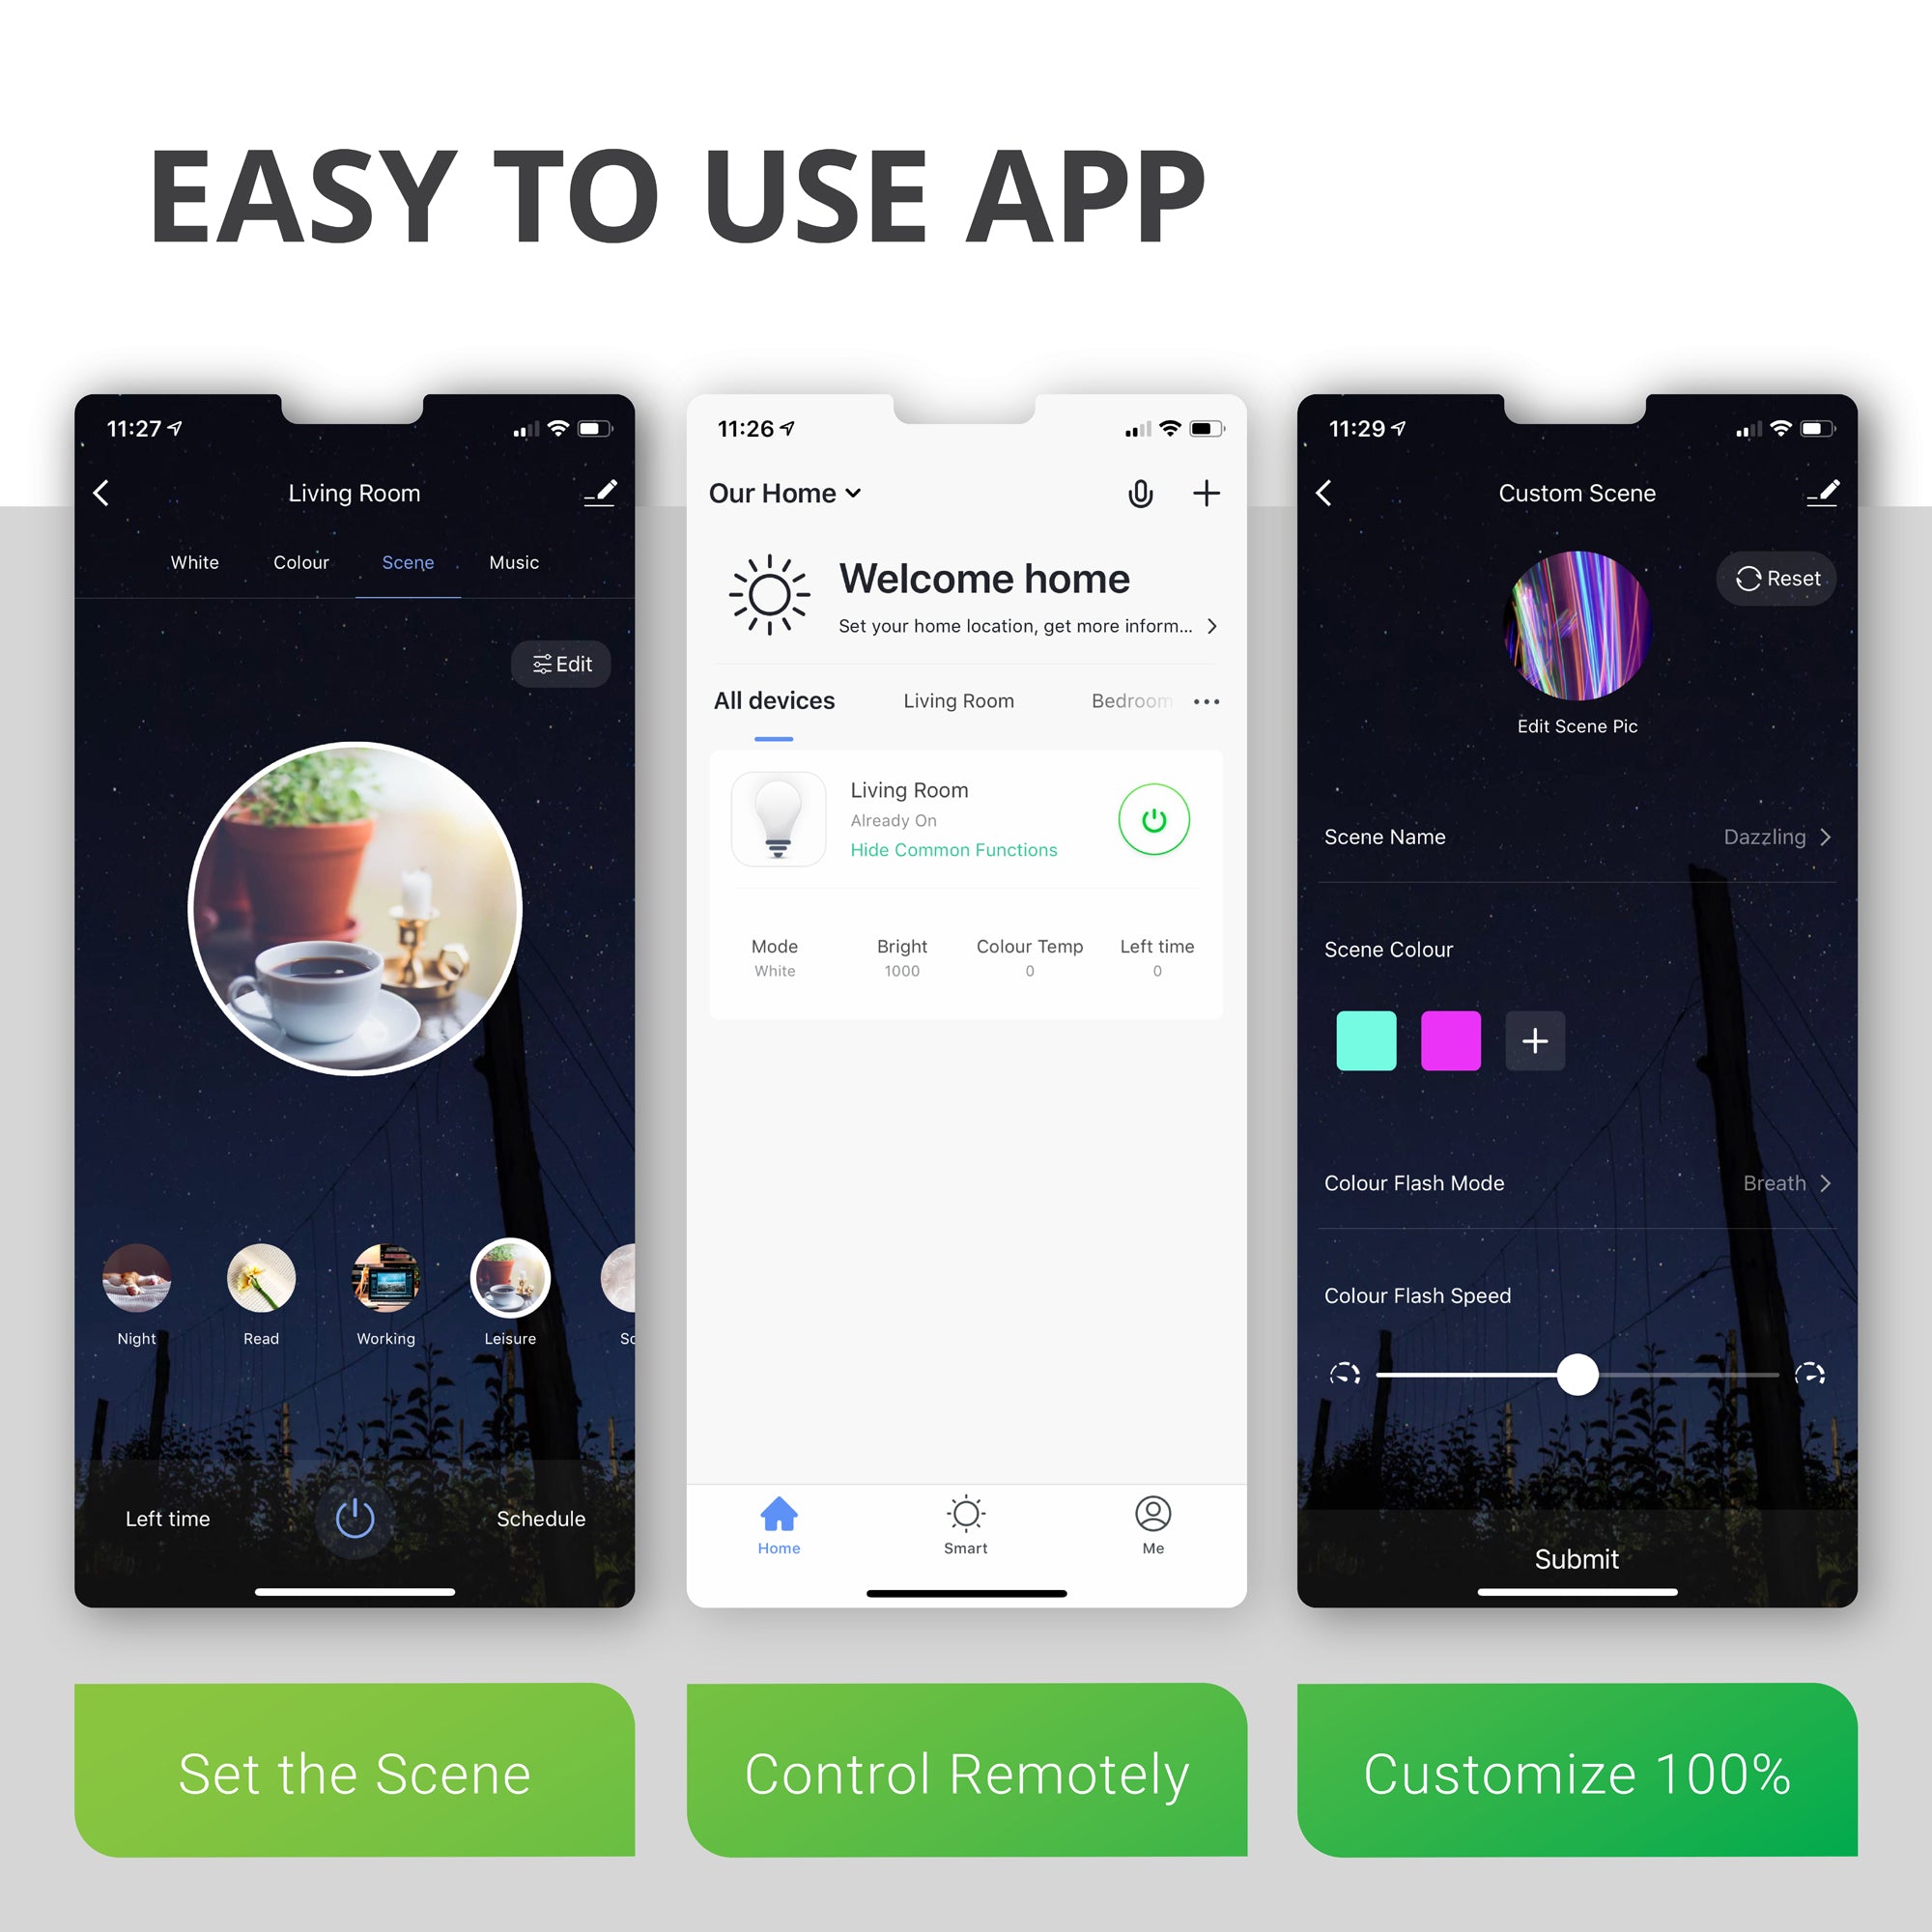 PAR30 LED Smart Bulb works with an easy to use app called the Smart Life App on iOS and Android devices. Select music sync, 16 million color choices, dimmable bulb options, and you can customize a scene selection and save it for later use or use pre-existing scenes.